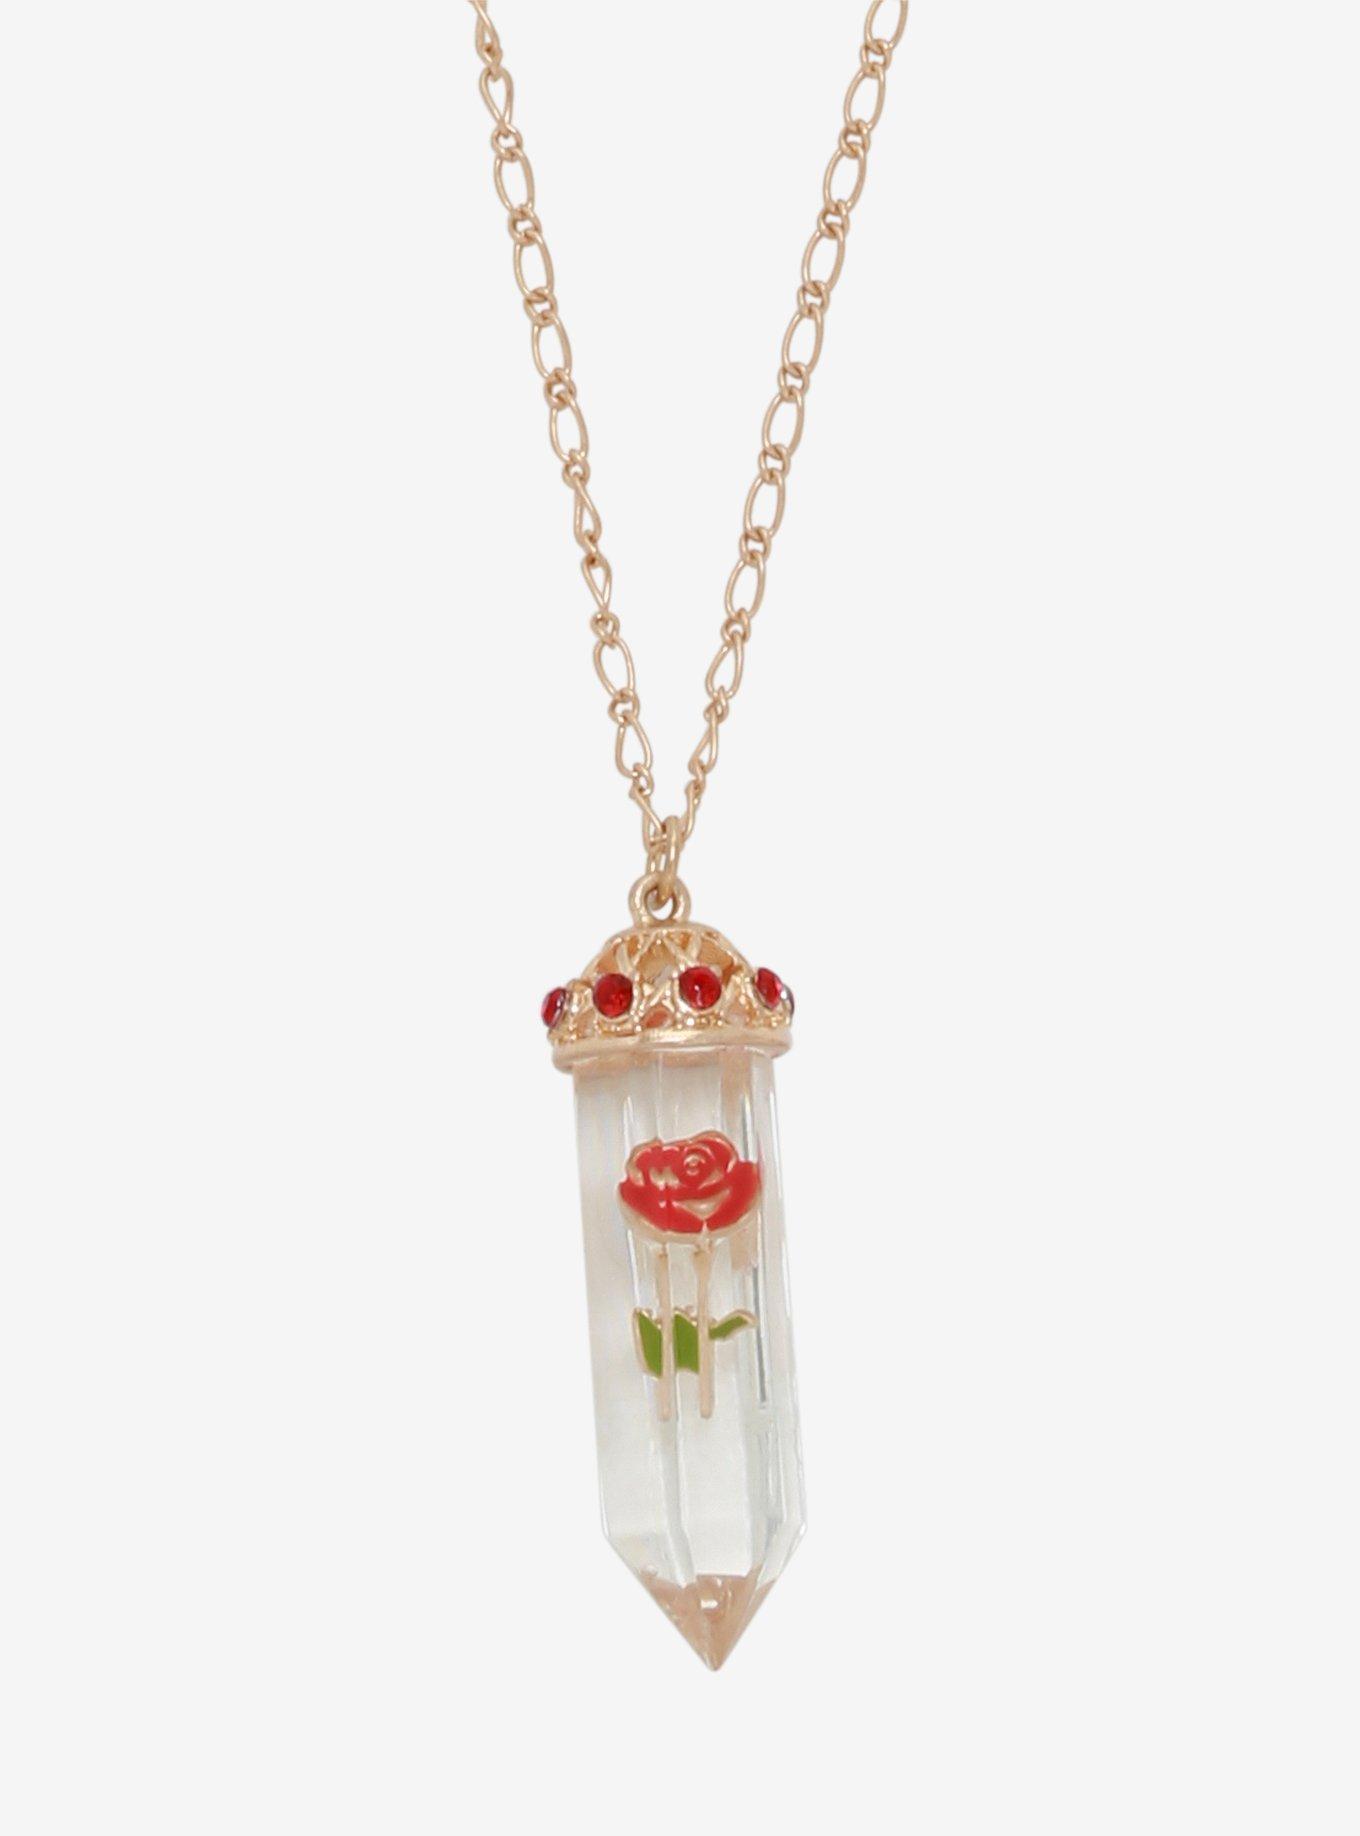 Necklaces for Girls: Disney, Anime & Crystal Necklaces